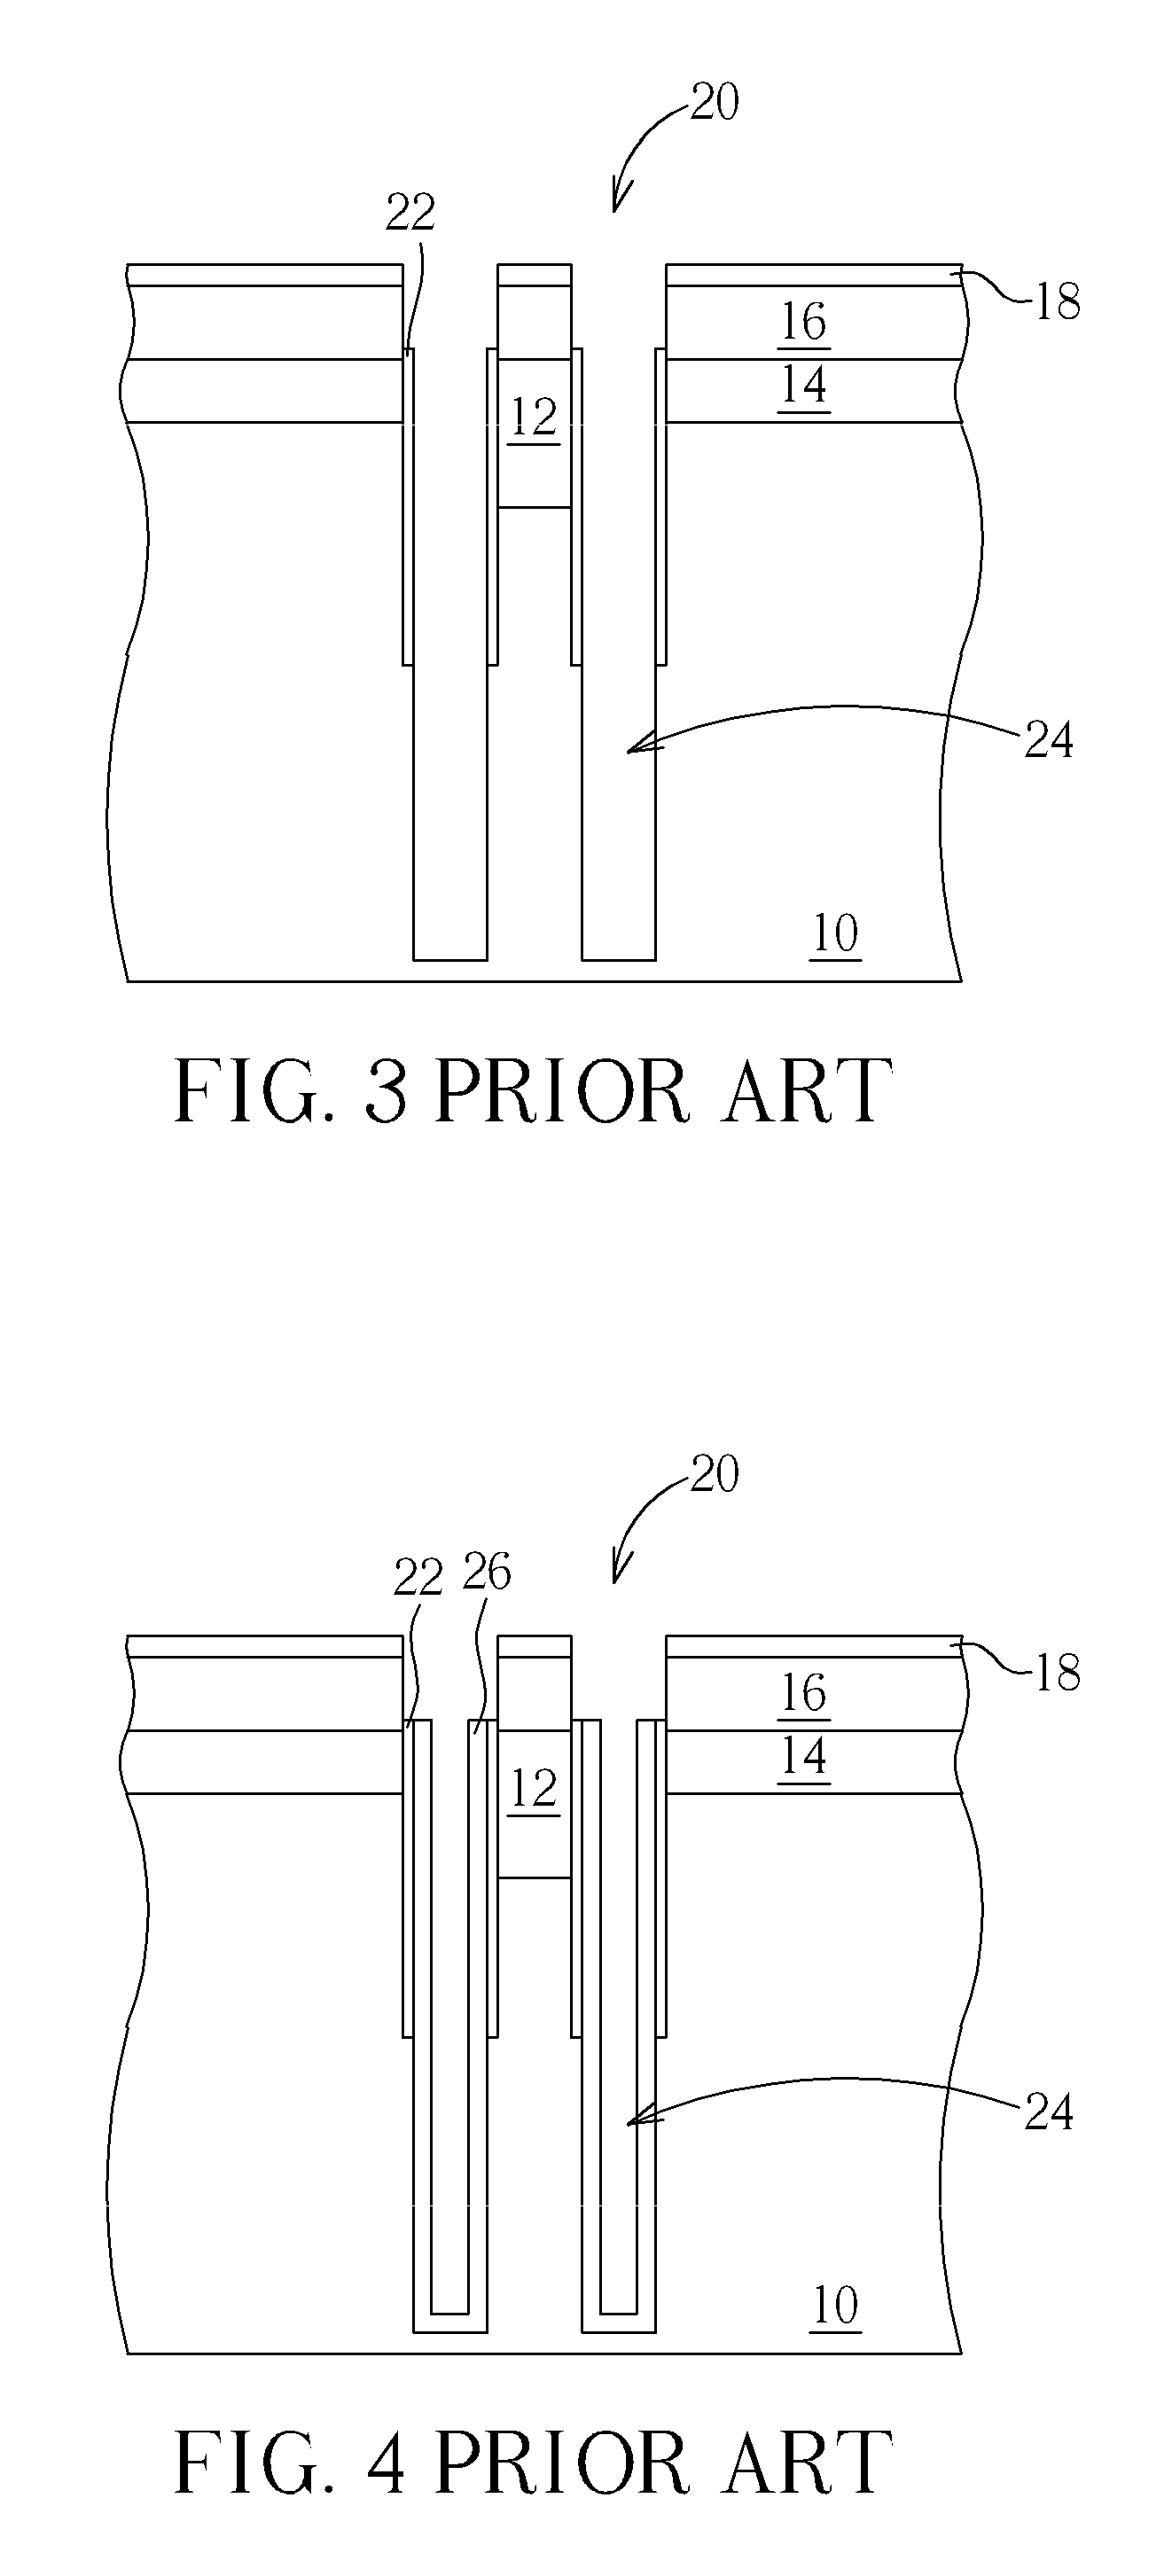 Structure of trench capacitor and method for manufacturing the same